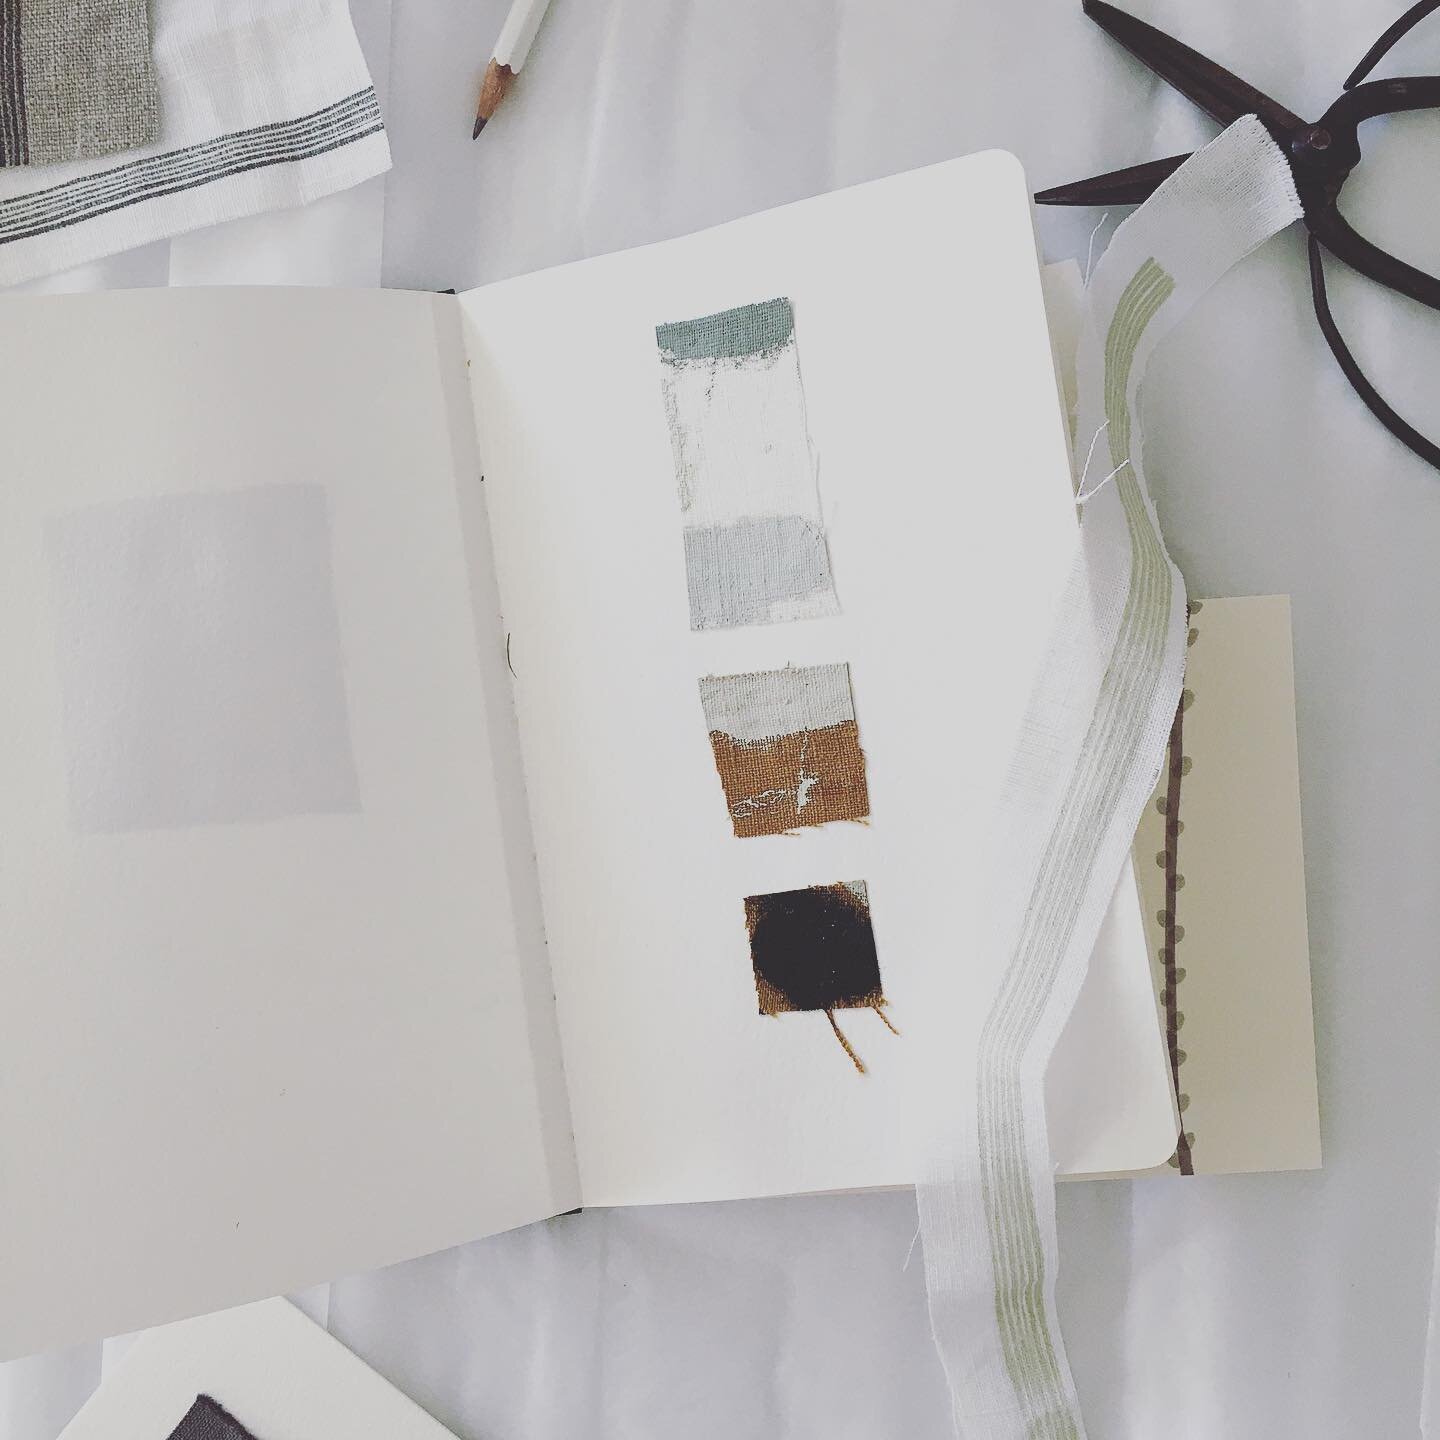 Colour notes▫️🔸〰️

Little test scraps stuck in notebooks as reference seem to become little stories of their own! 🌱

Happy Friday x
.
.
.
.
.
.
#studio #atelier #saltatelier #colour #colournotes #color #colourlove #fabric #linen #linenlove #textile